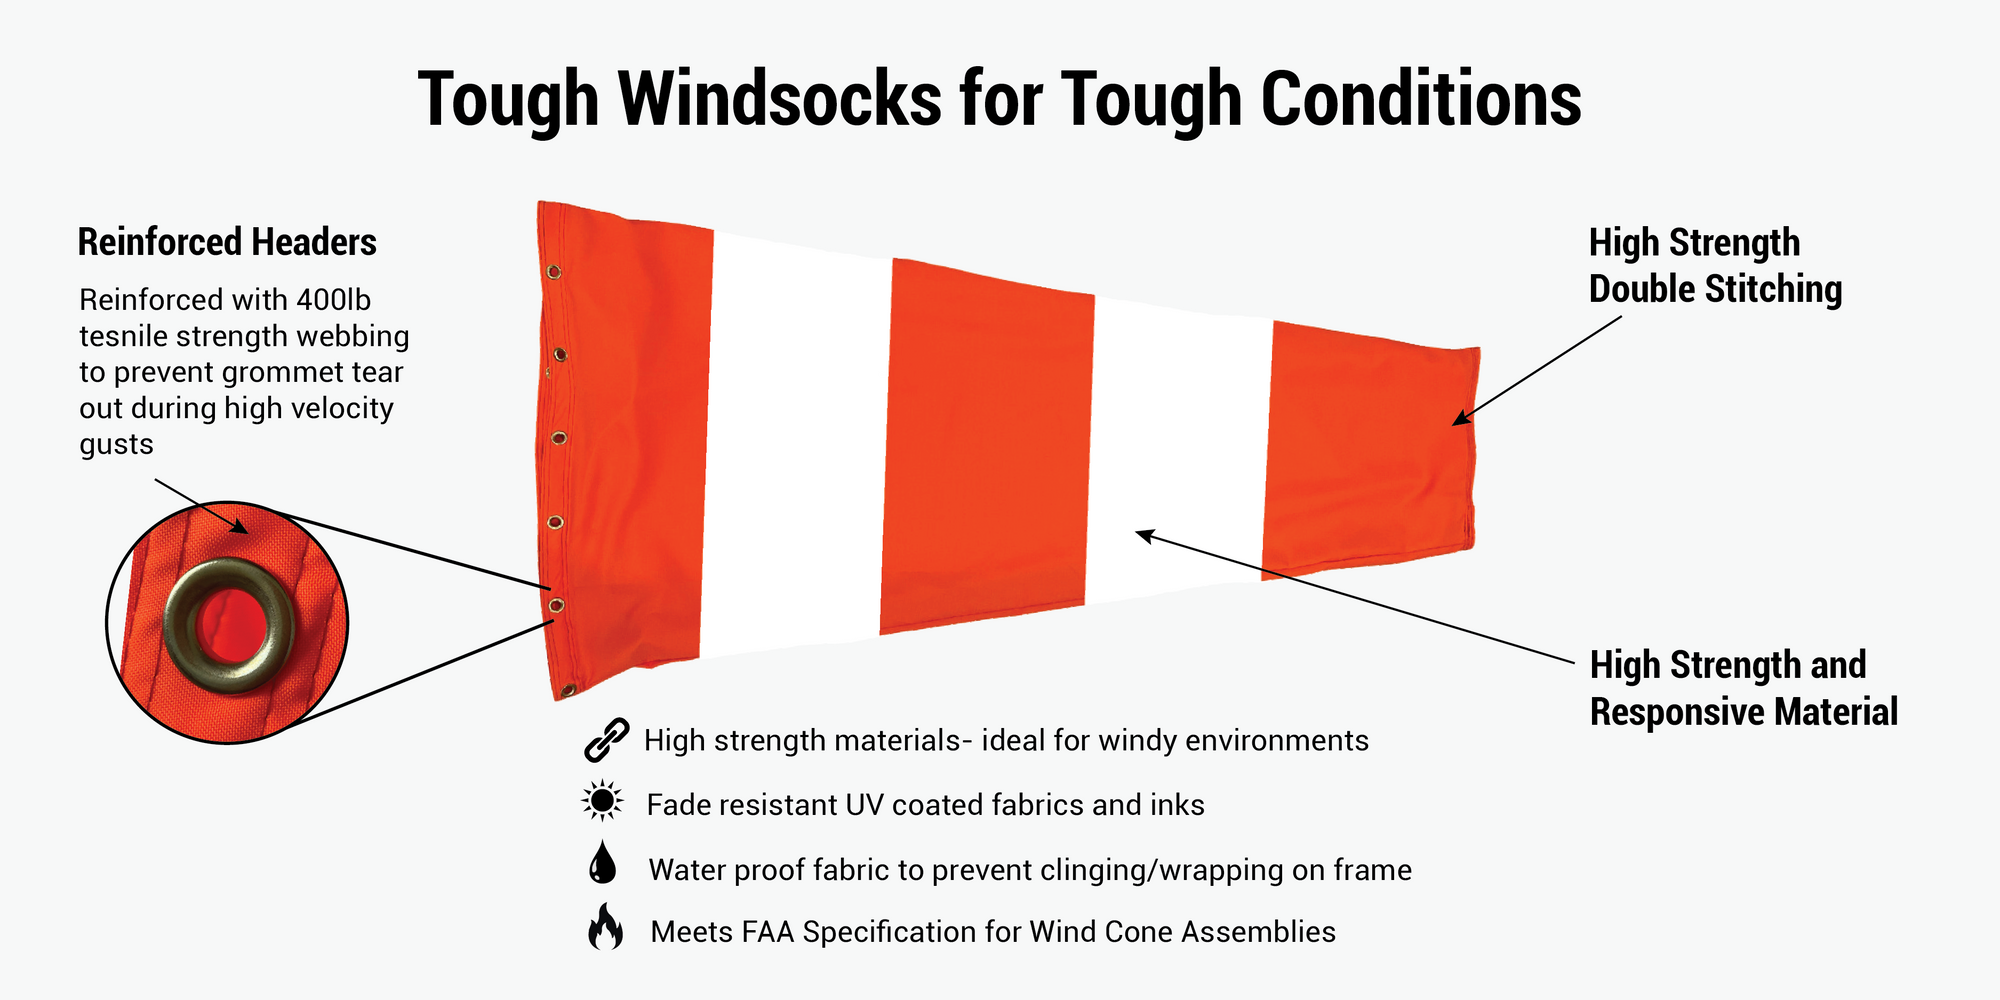 Infographic on High Strength Orange and White Variagated Airport Windsocks for Aviation Use